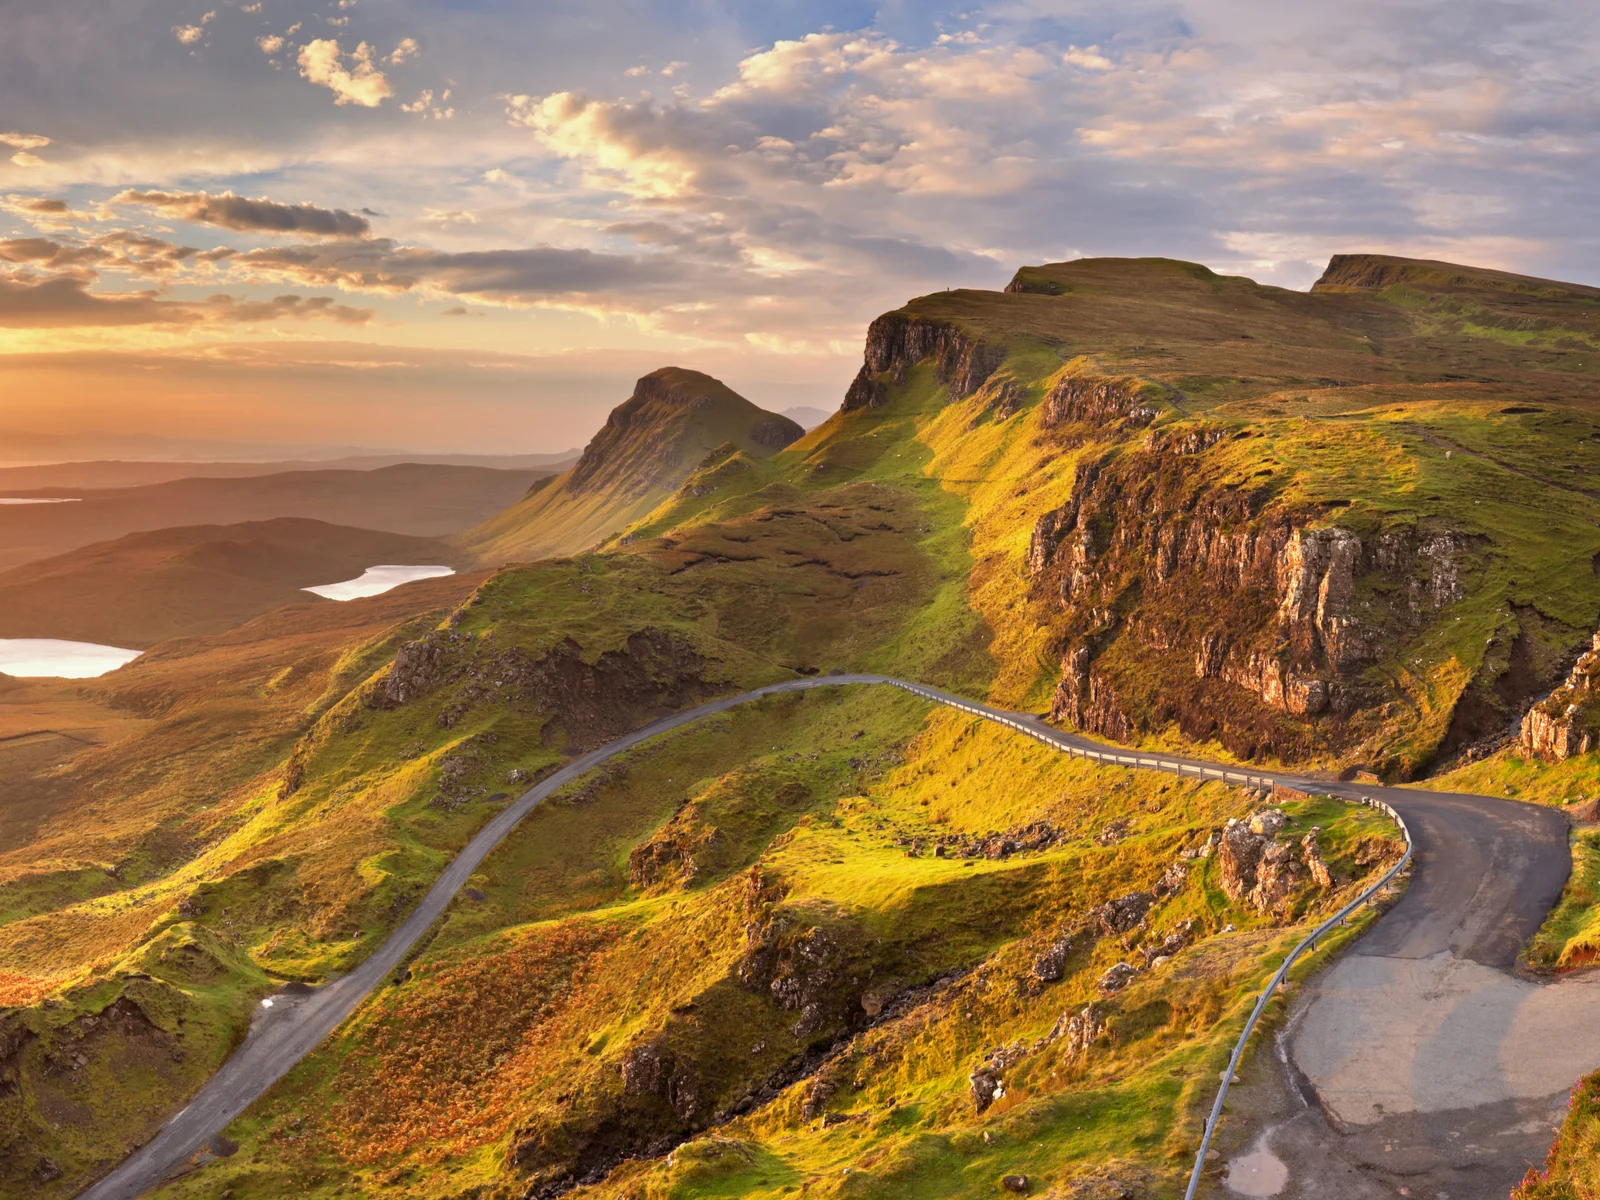 Sunrise over Quiraing on the Isle of Sky during the least busy time to visit Scotland